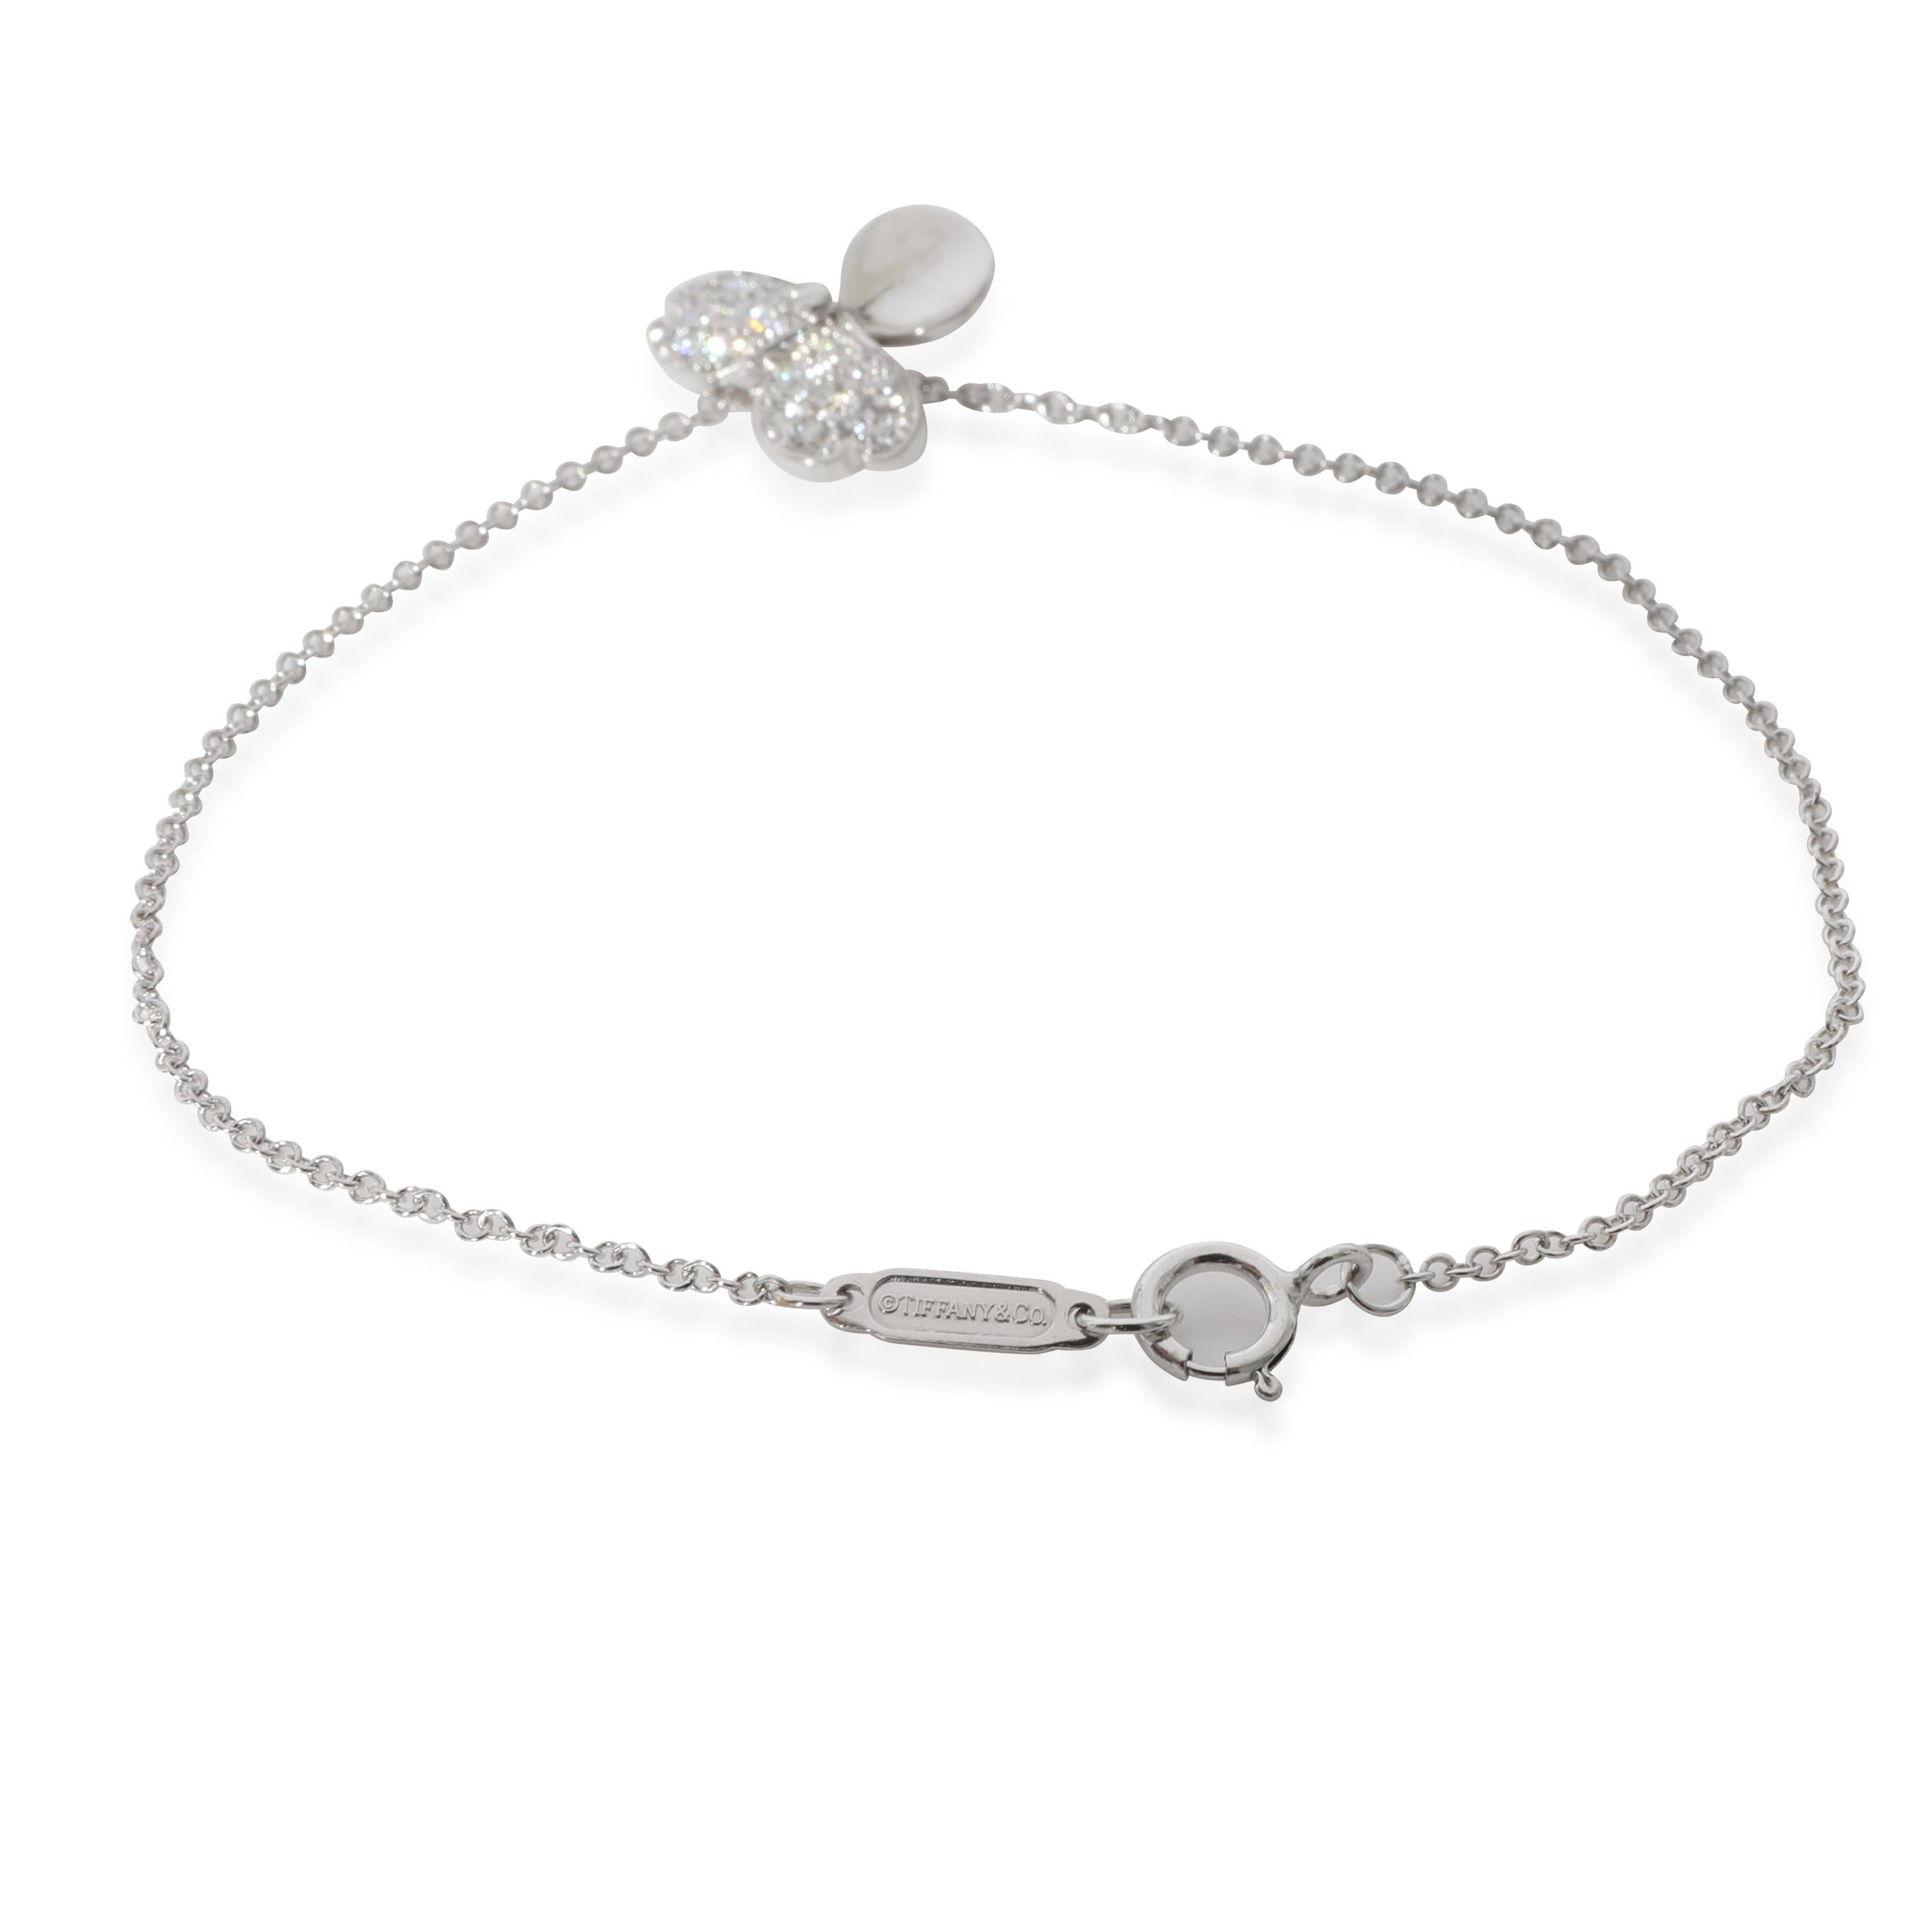 Tiffany & Co. Paper Flower Diamond Bracelet in Platinum 0.17 CTW

PRIMARY DETAILS
SKU: 127524
Listing Title: Tiffany & Co. Paper Flower Diamond Bracelet in Platinum 0.17 CTW
Condition Description: Retails for 2700 USD. In excellent condition and